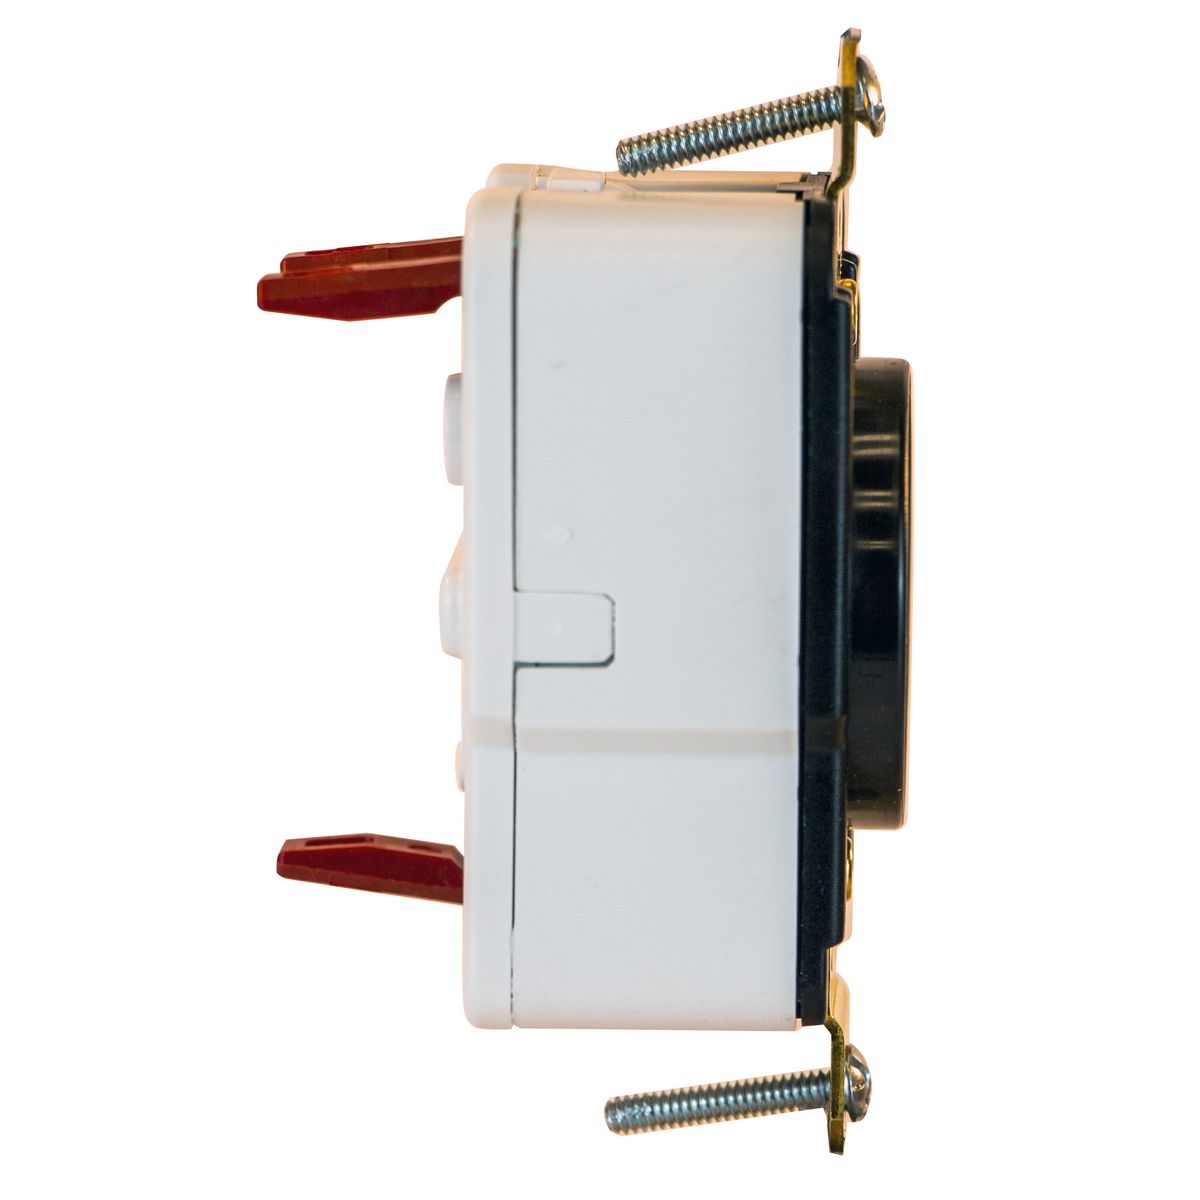 HBL2610ST - Twist-Lock® EdgeConnect™ Receptacle with Spring Termination,  30A, 125V, L5-30R, Black, HBL2610ST